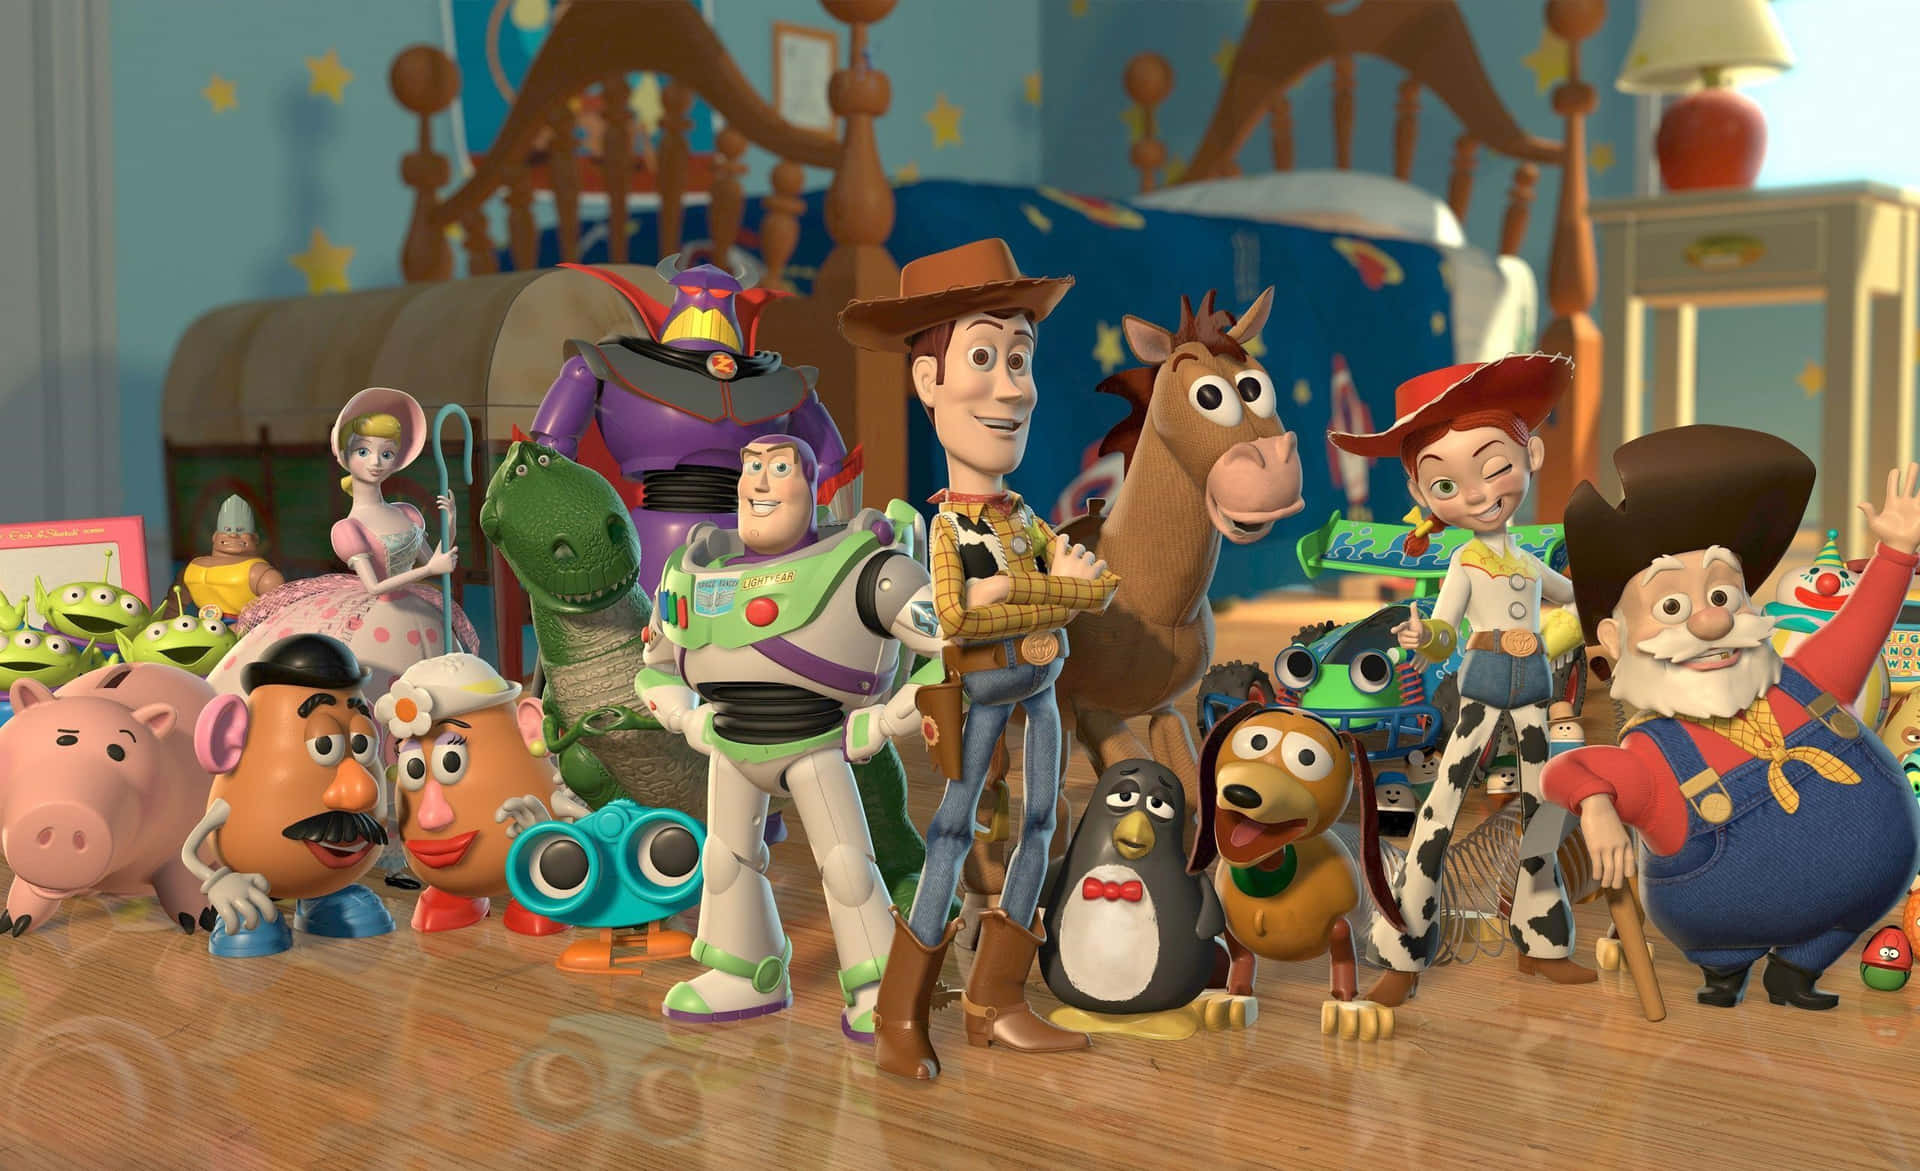 Animated Toy Characters Gathering.jpg Wallpaper